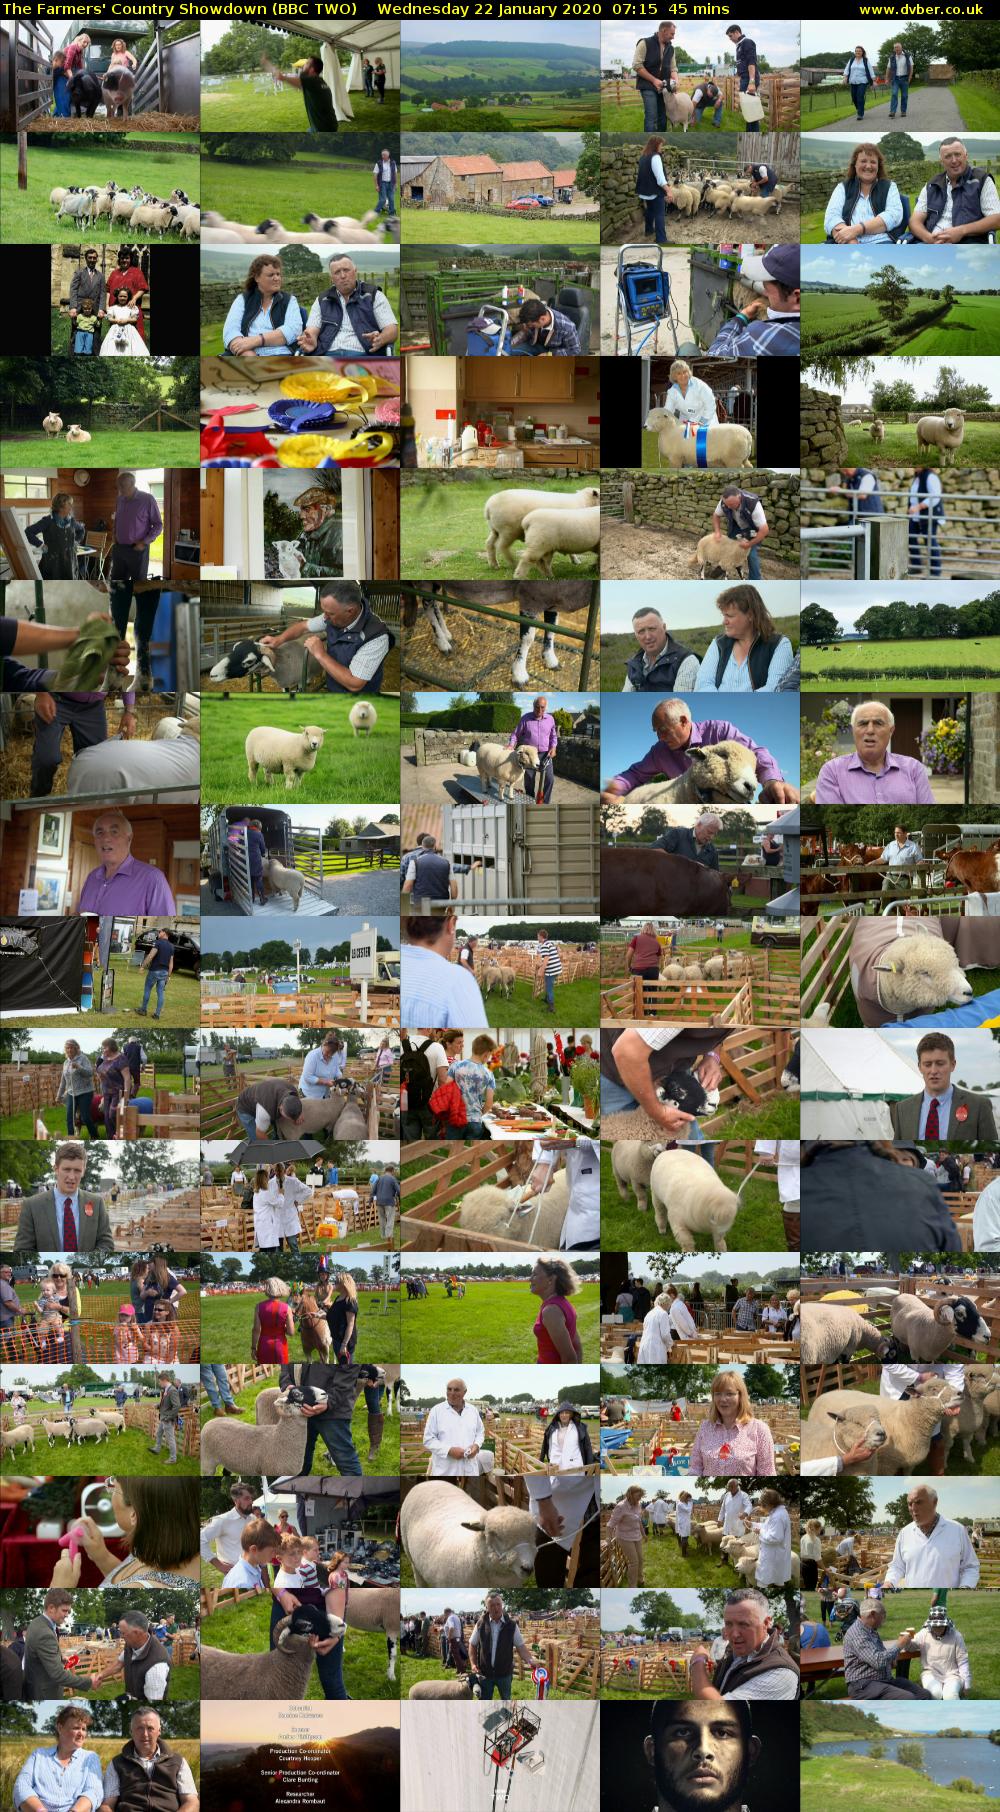 The Farmers' Country Showdown (BBC TWO) Wednesday 22 January 2020 07:15 - 08:00